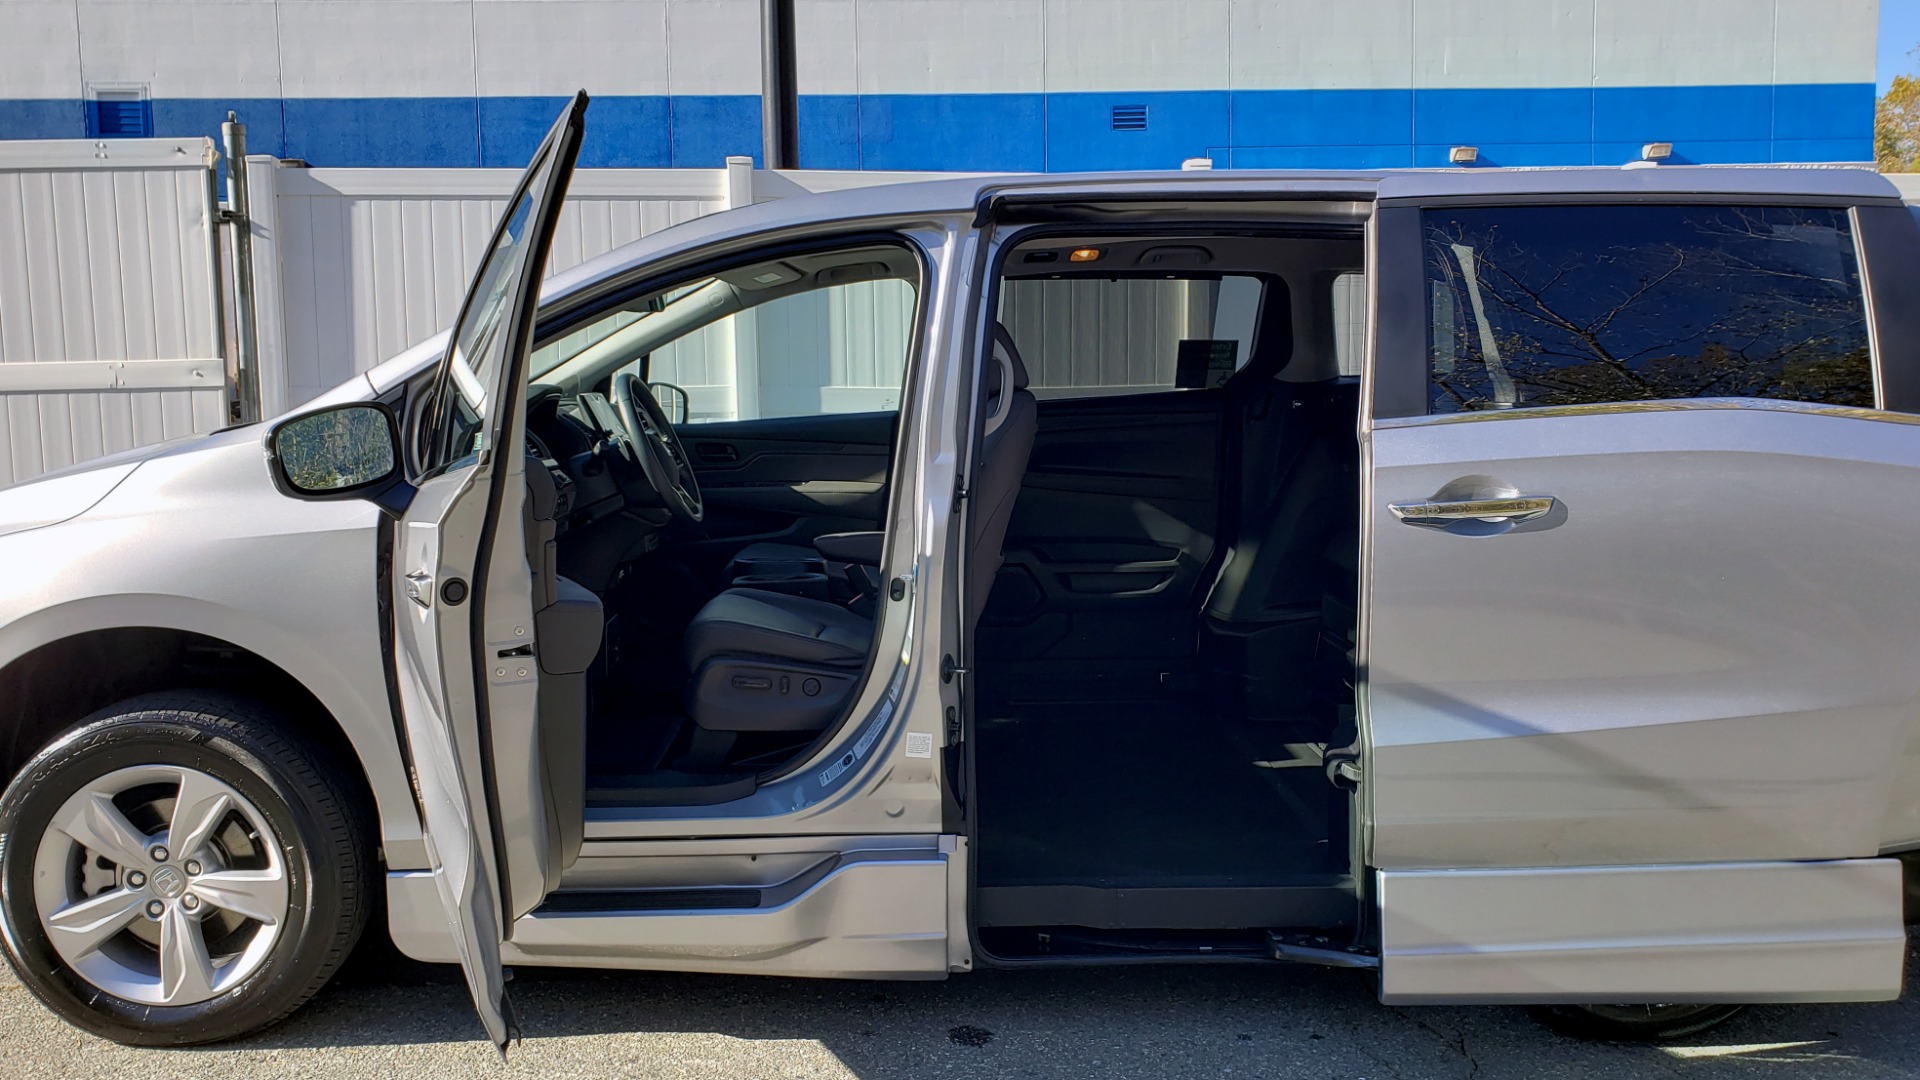 Used 2019 Honda ODYSSEY EX-L BRAUNABILITY / NAV / RES / LKA / BLUE-RAY / SUNROOF / REARVIEW for sale Sold at Formula Imports in Charlotte NC 28227 9